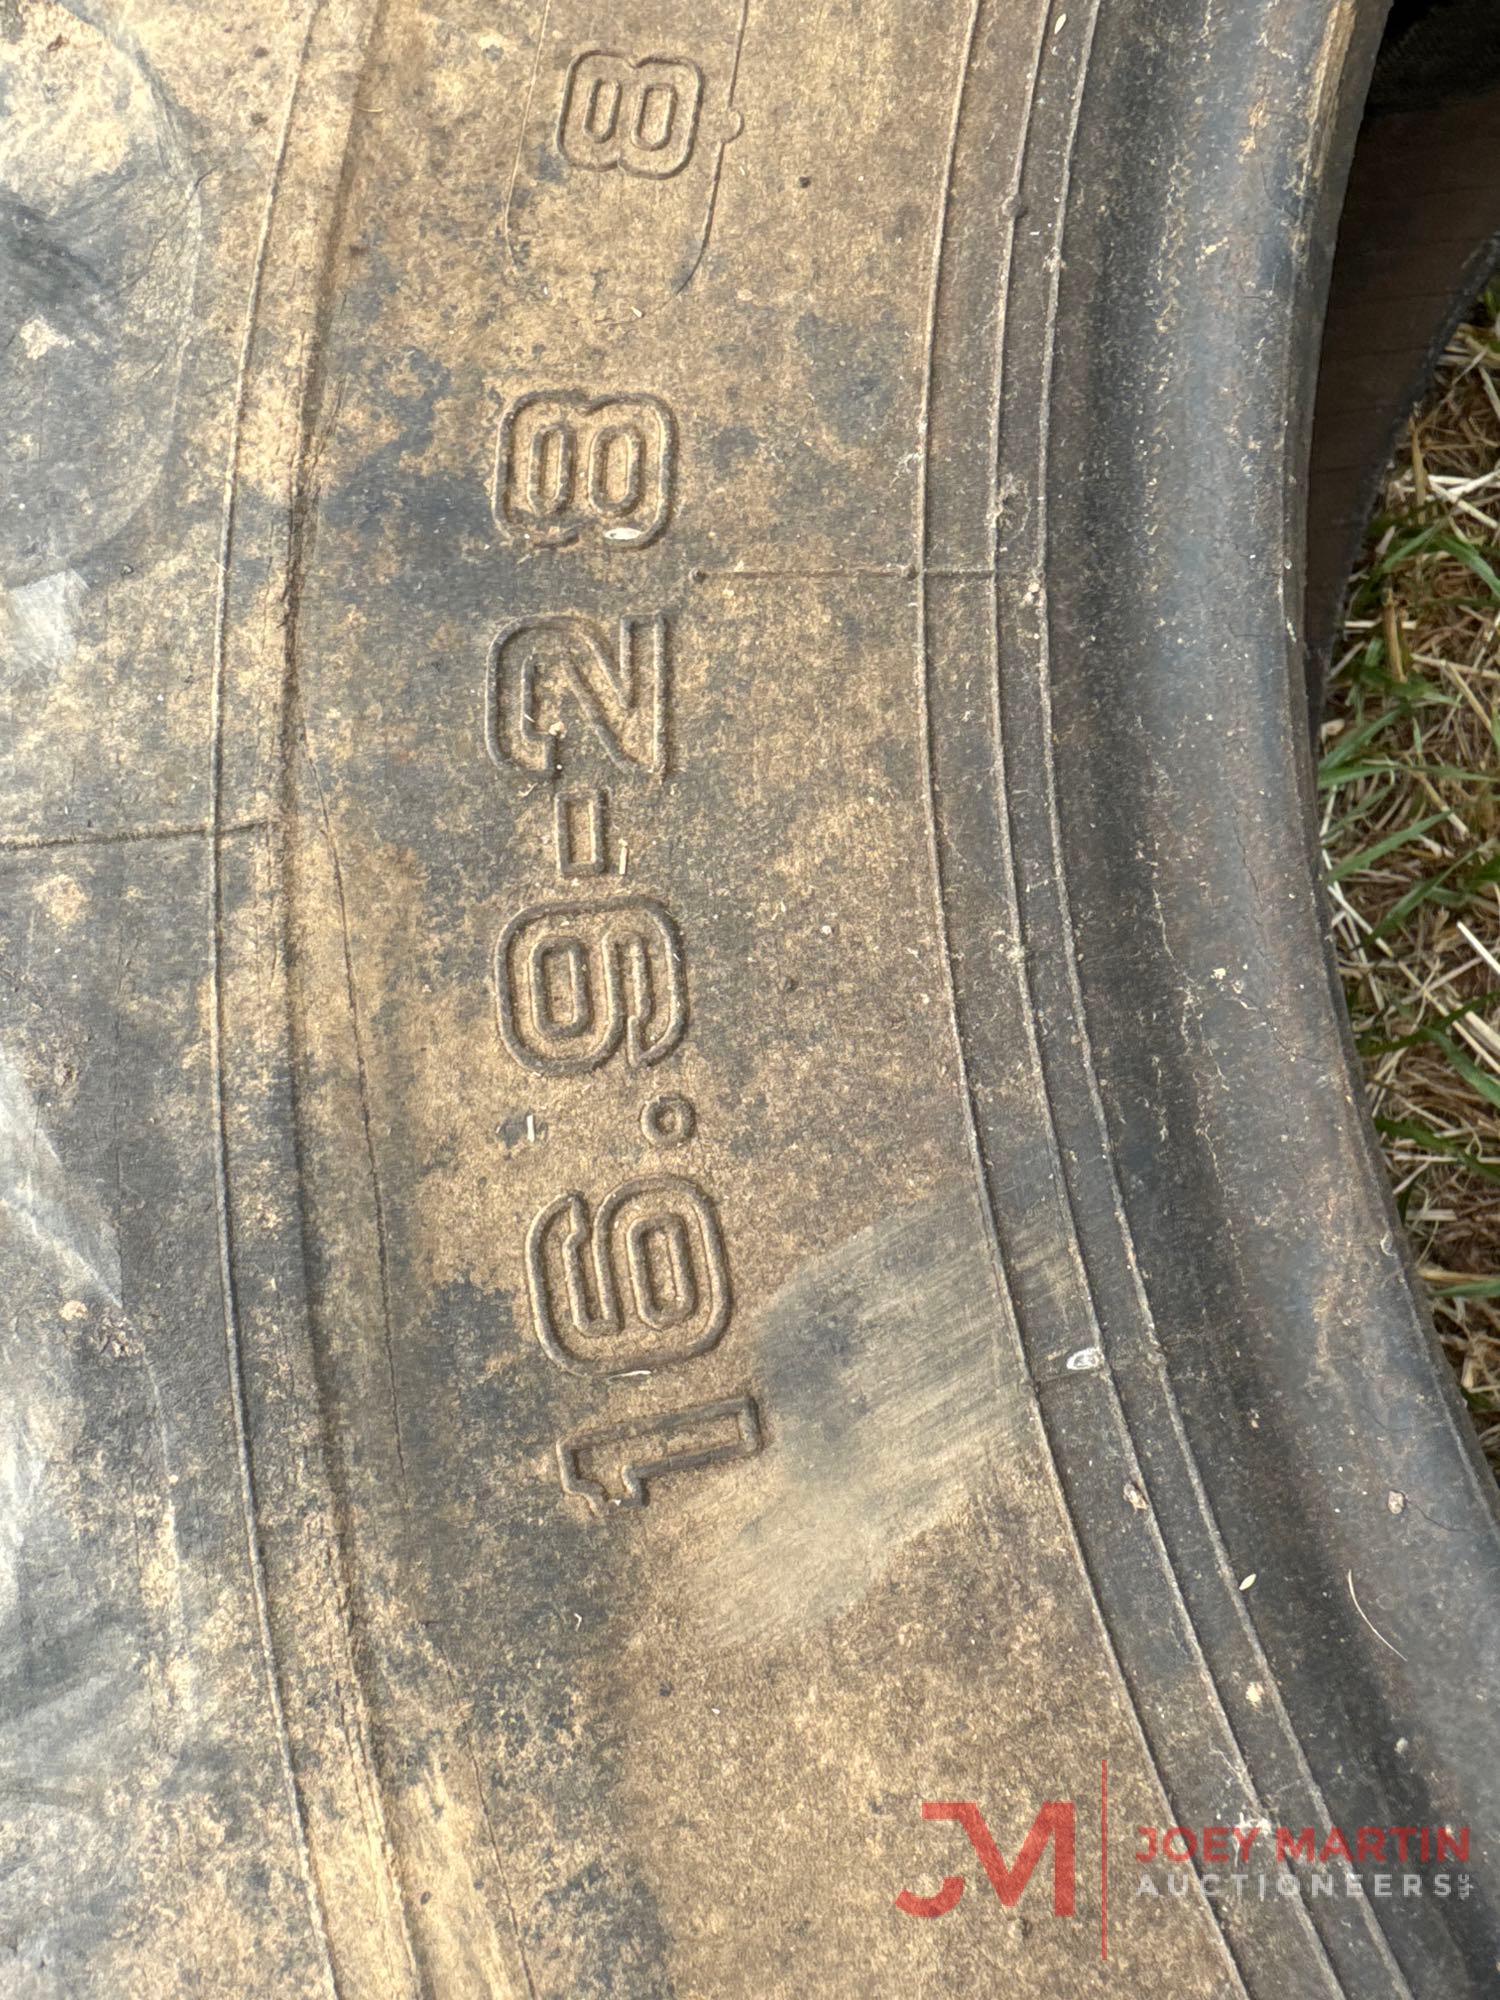 (2) TRACTOR TIRES